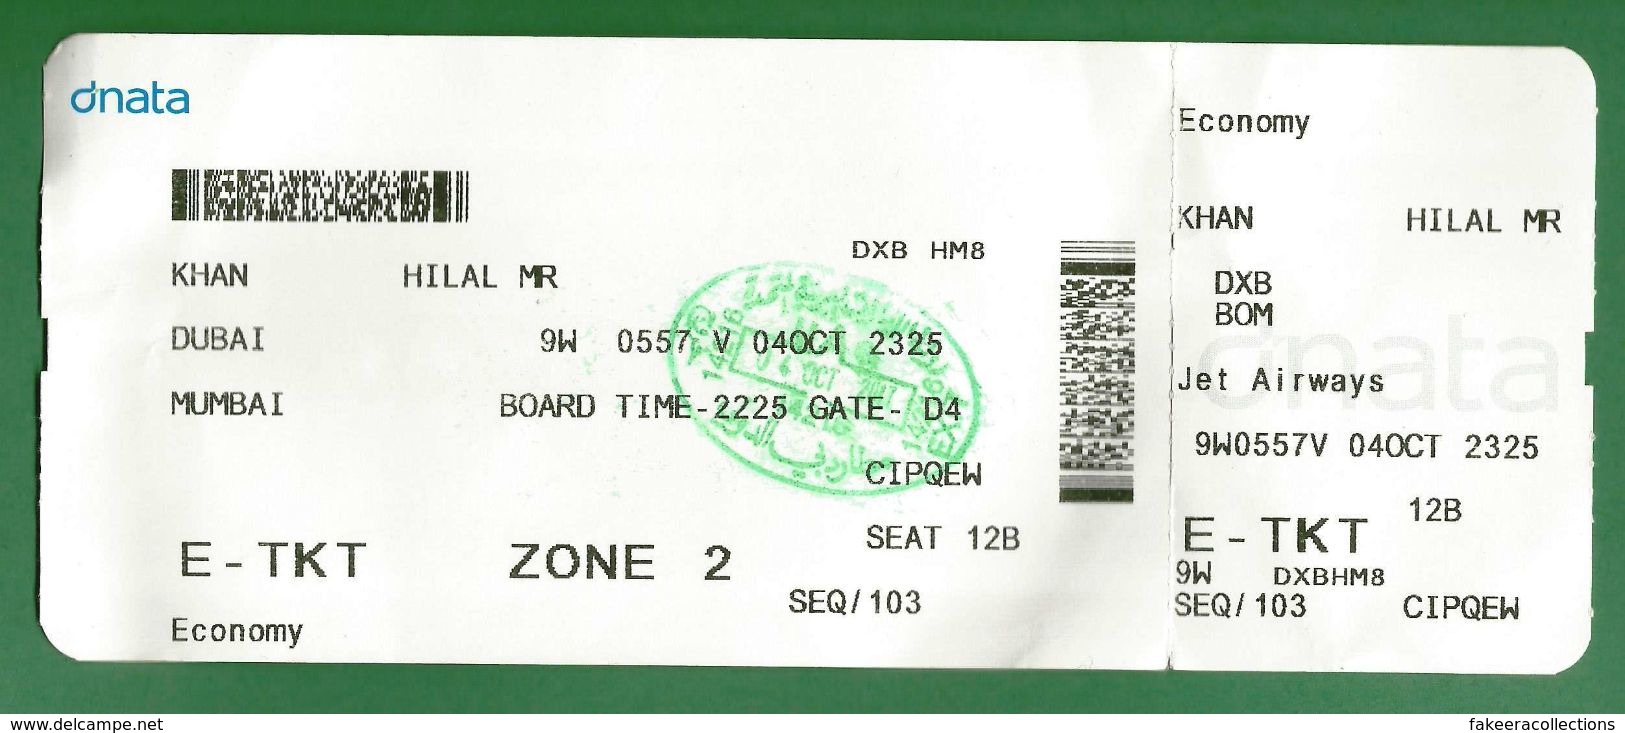 DUBAI, UAE To MUMBAI, INDIA - Boarding Card / Pass For JET AIRWAYS Issued By DNATA - Travel Ticket, Immigration Seal ... - Mundo